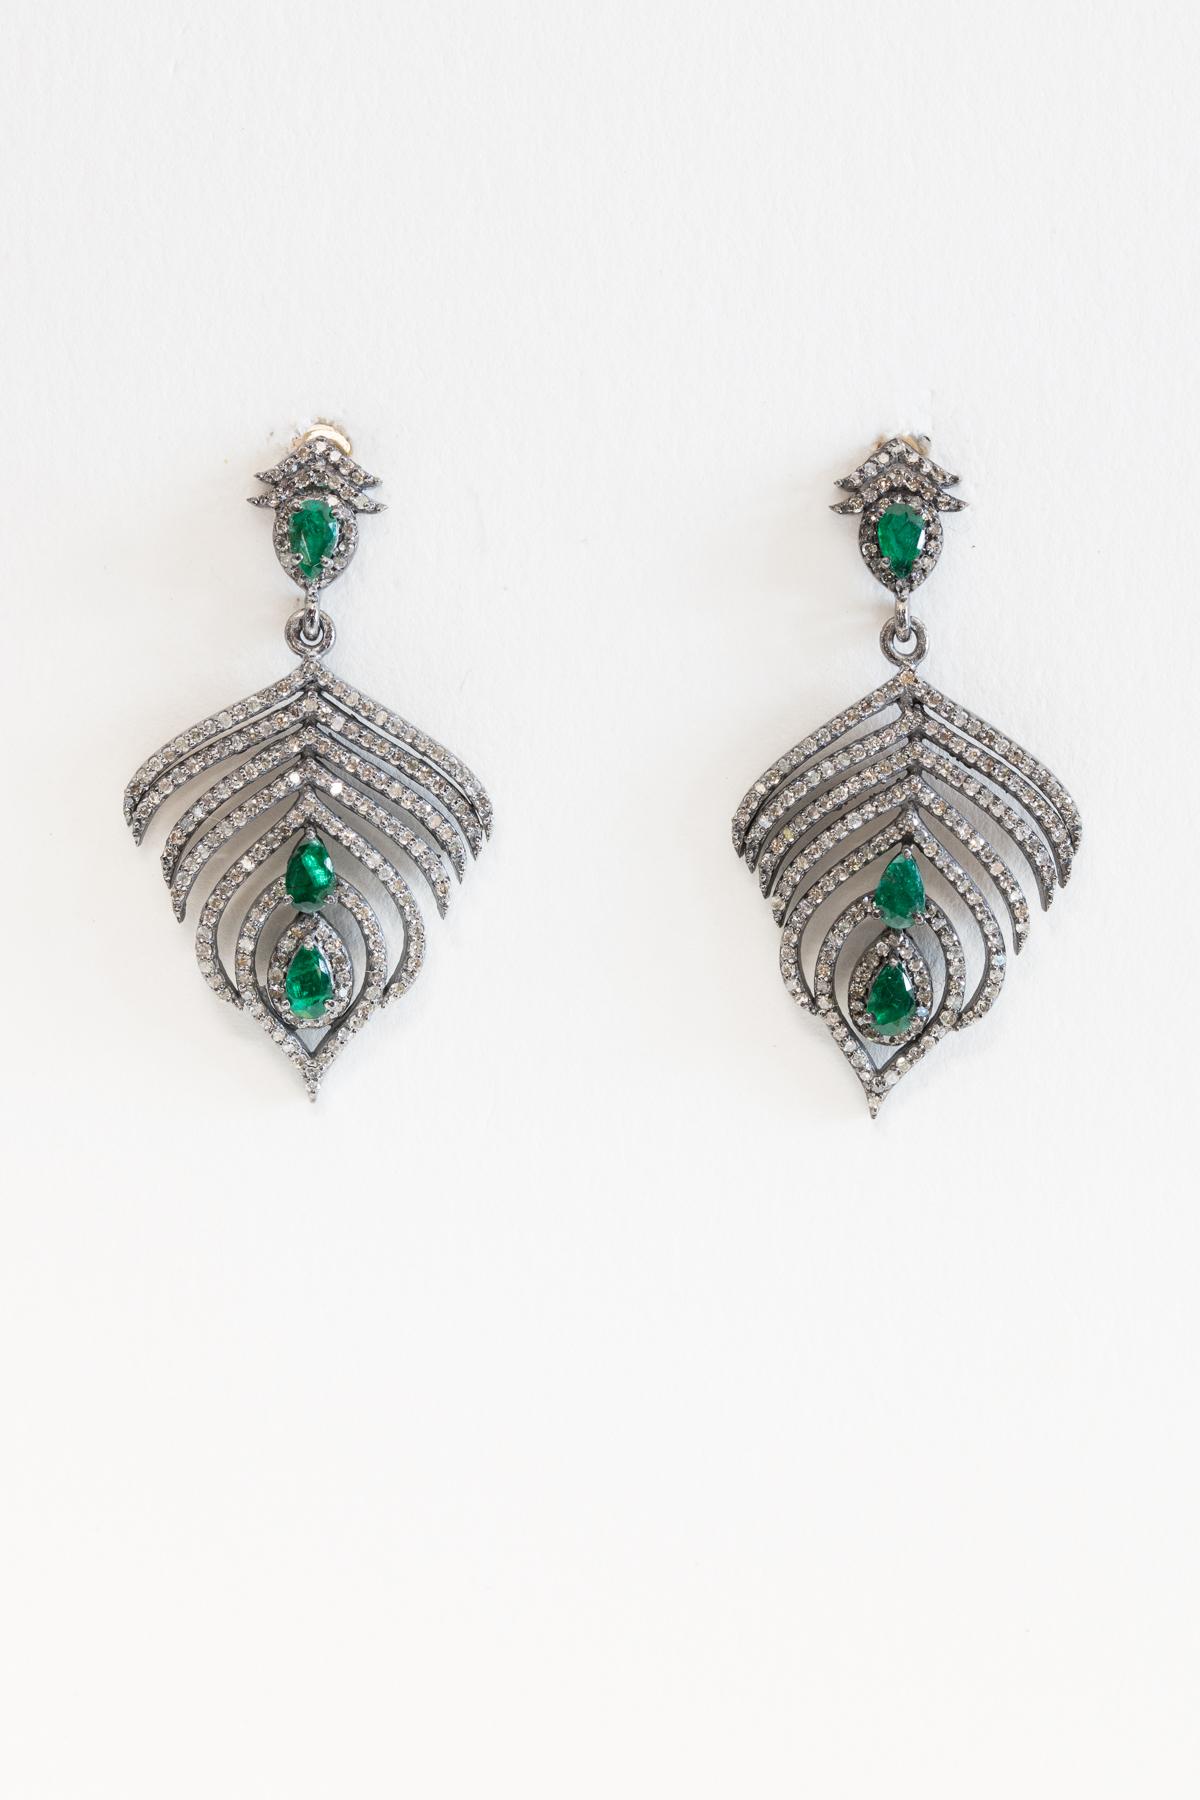 A great twist on the feather earrings...a bit shorter with pave` set diamonds and three faceted, pear-shaped emeralds set in an oxidized sterling silver.  Has an Art Deco feel about them.  Carat weight of diamonds is 1.68; emeralds are 1.39 carats. 